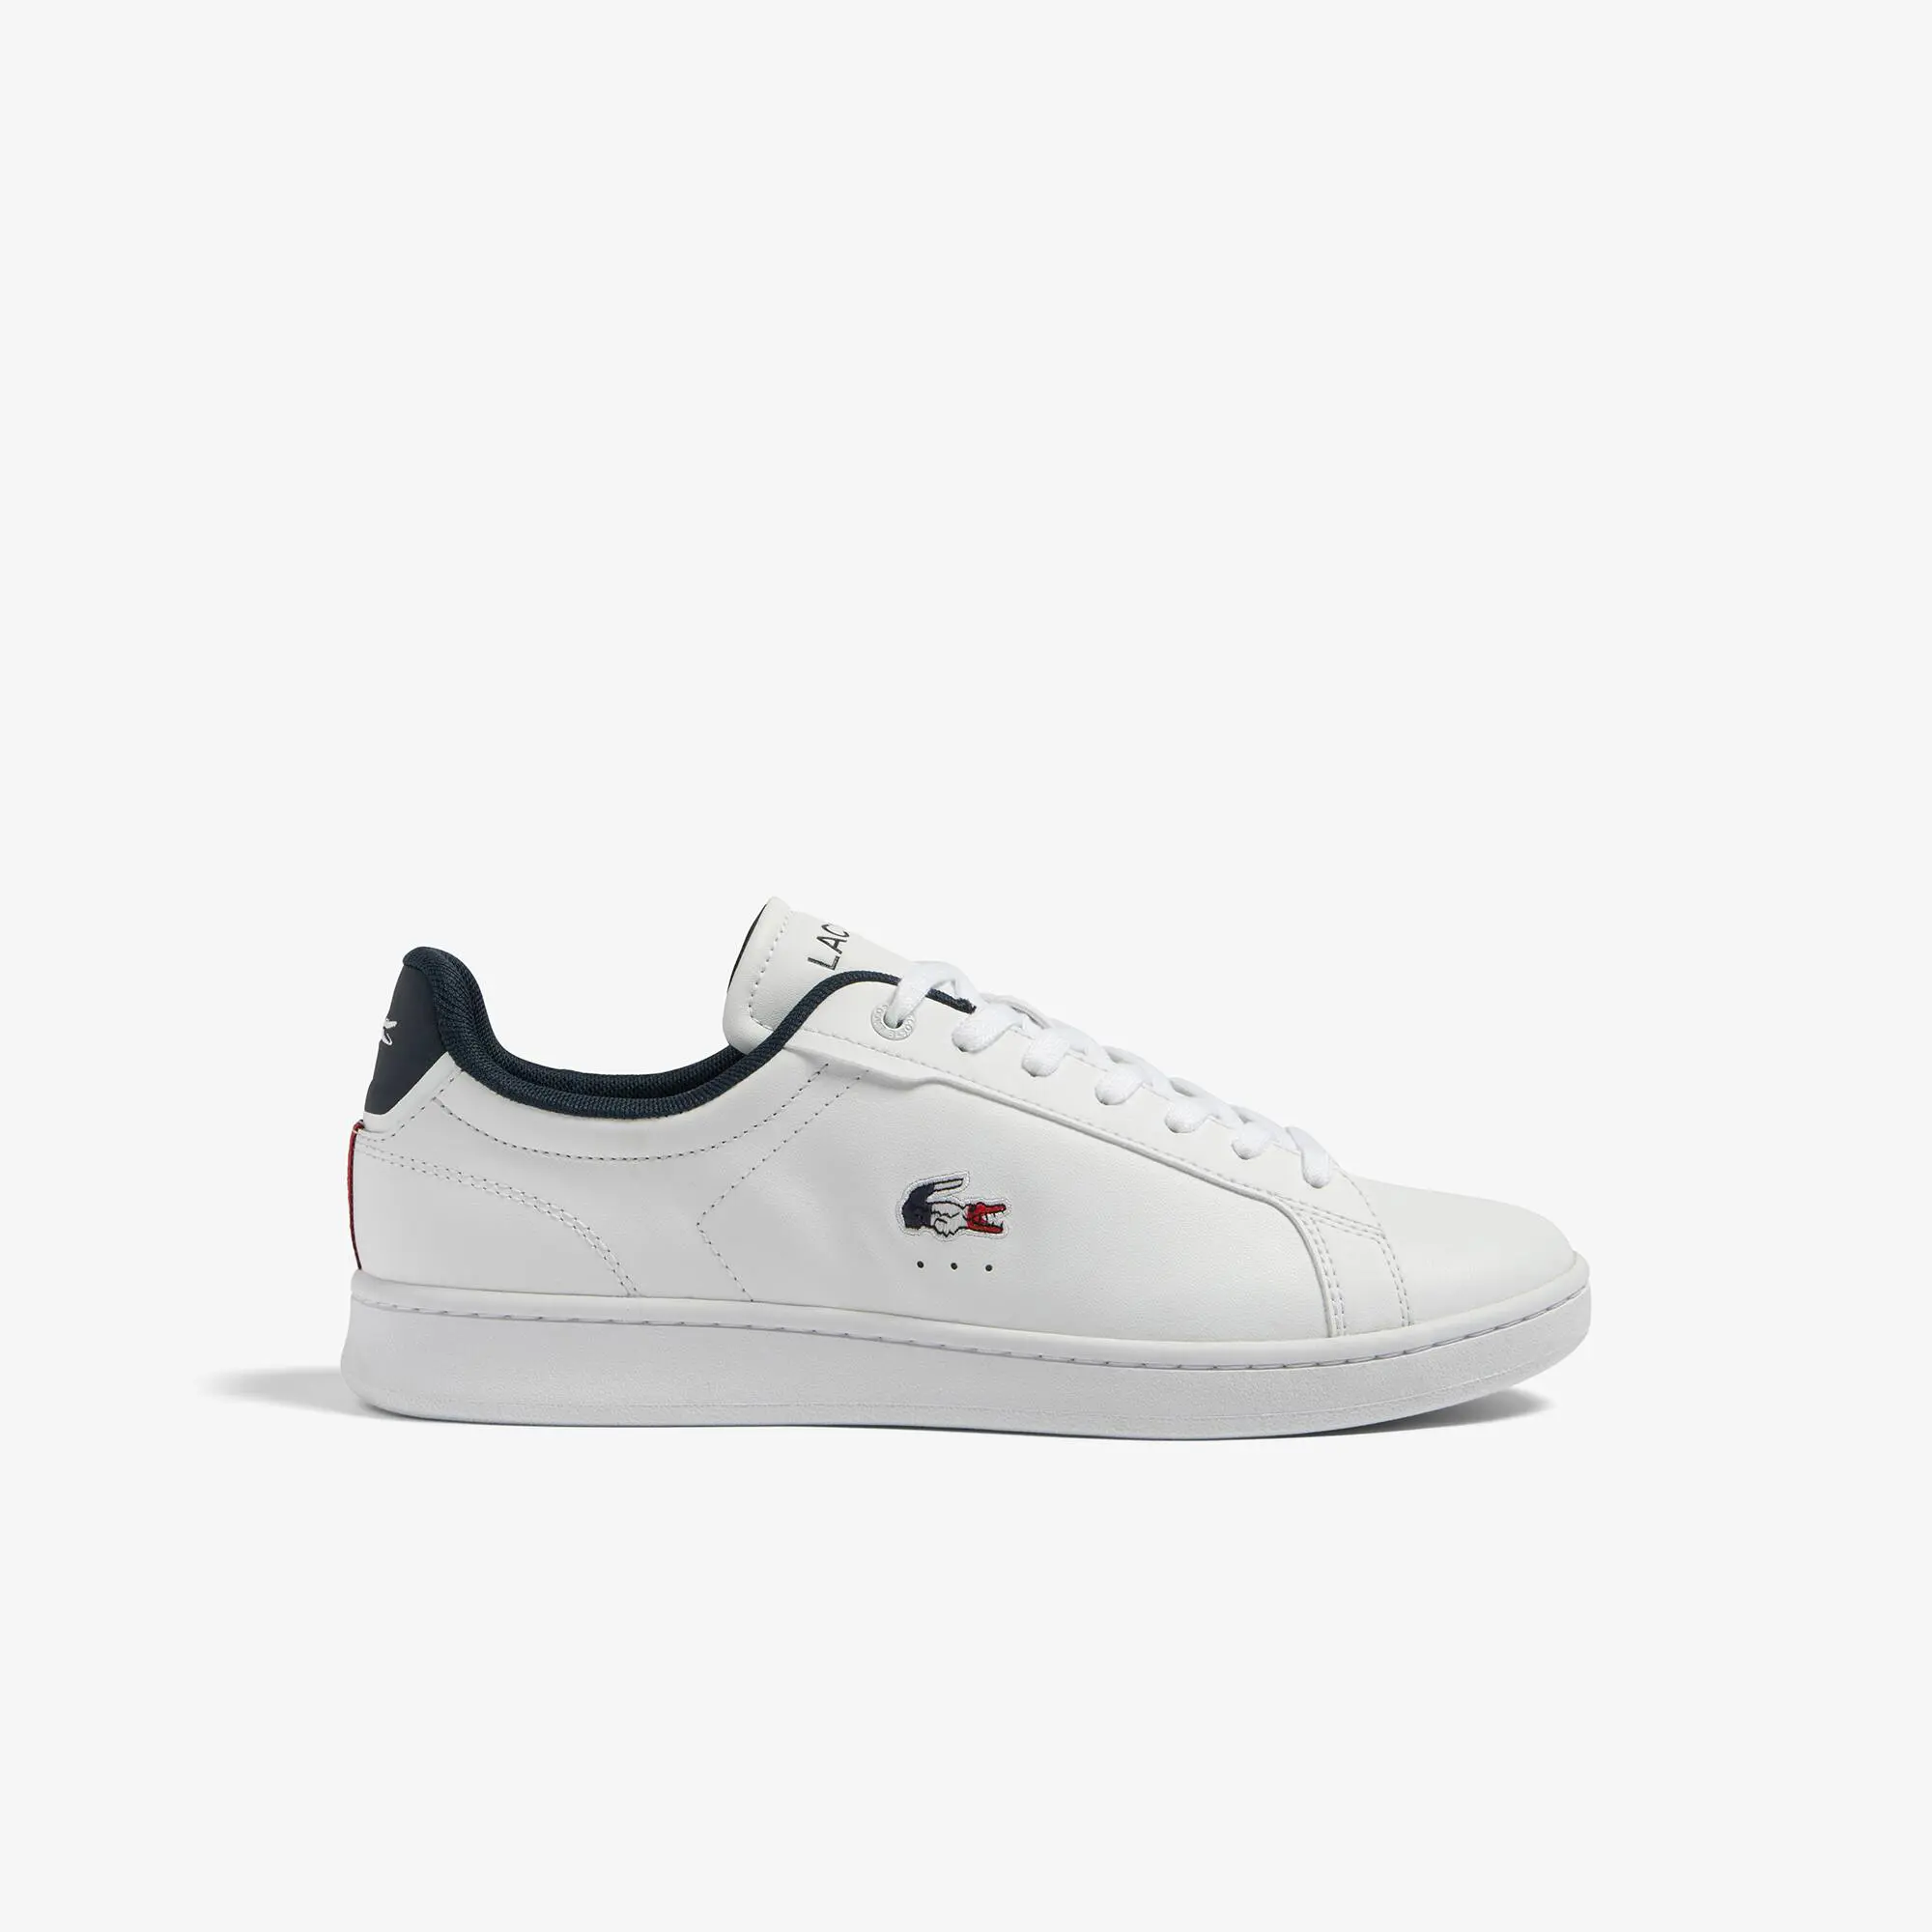 Lacoste Sneakers Carnaby Pro homme Lacoste en cuir tricolores. 1